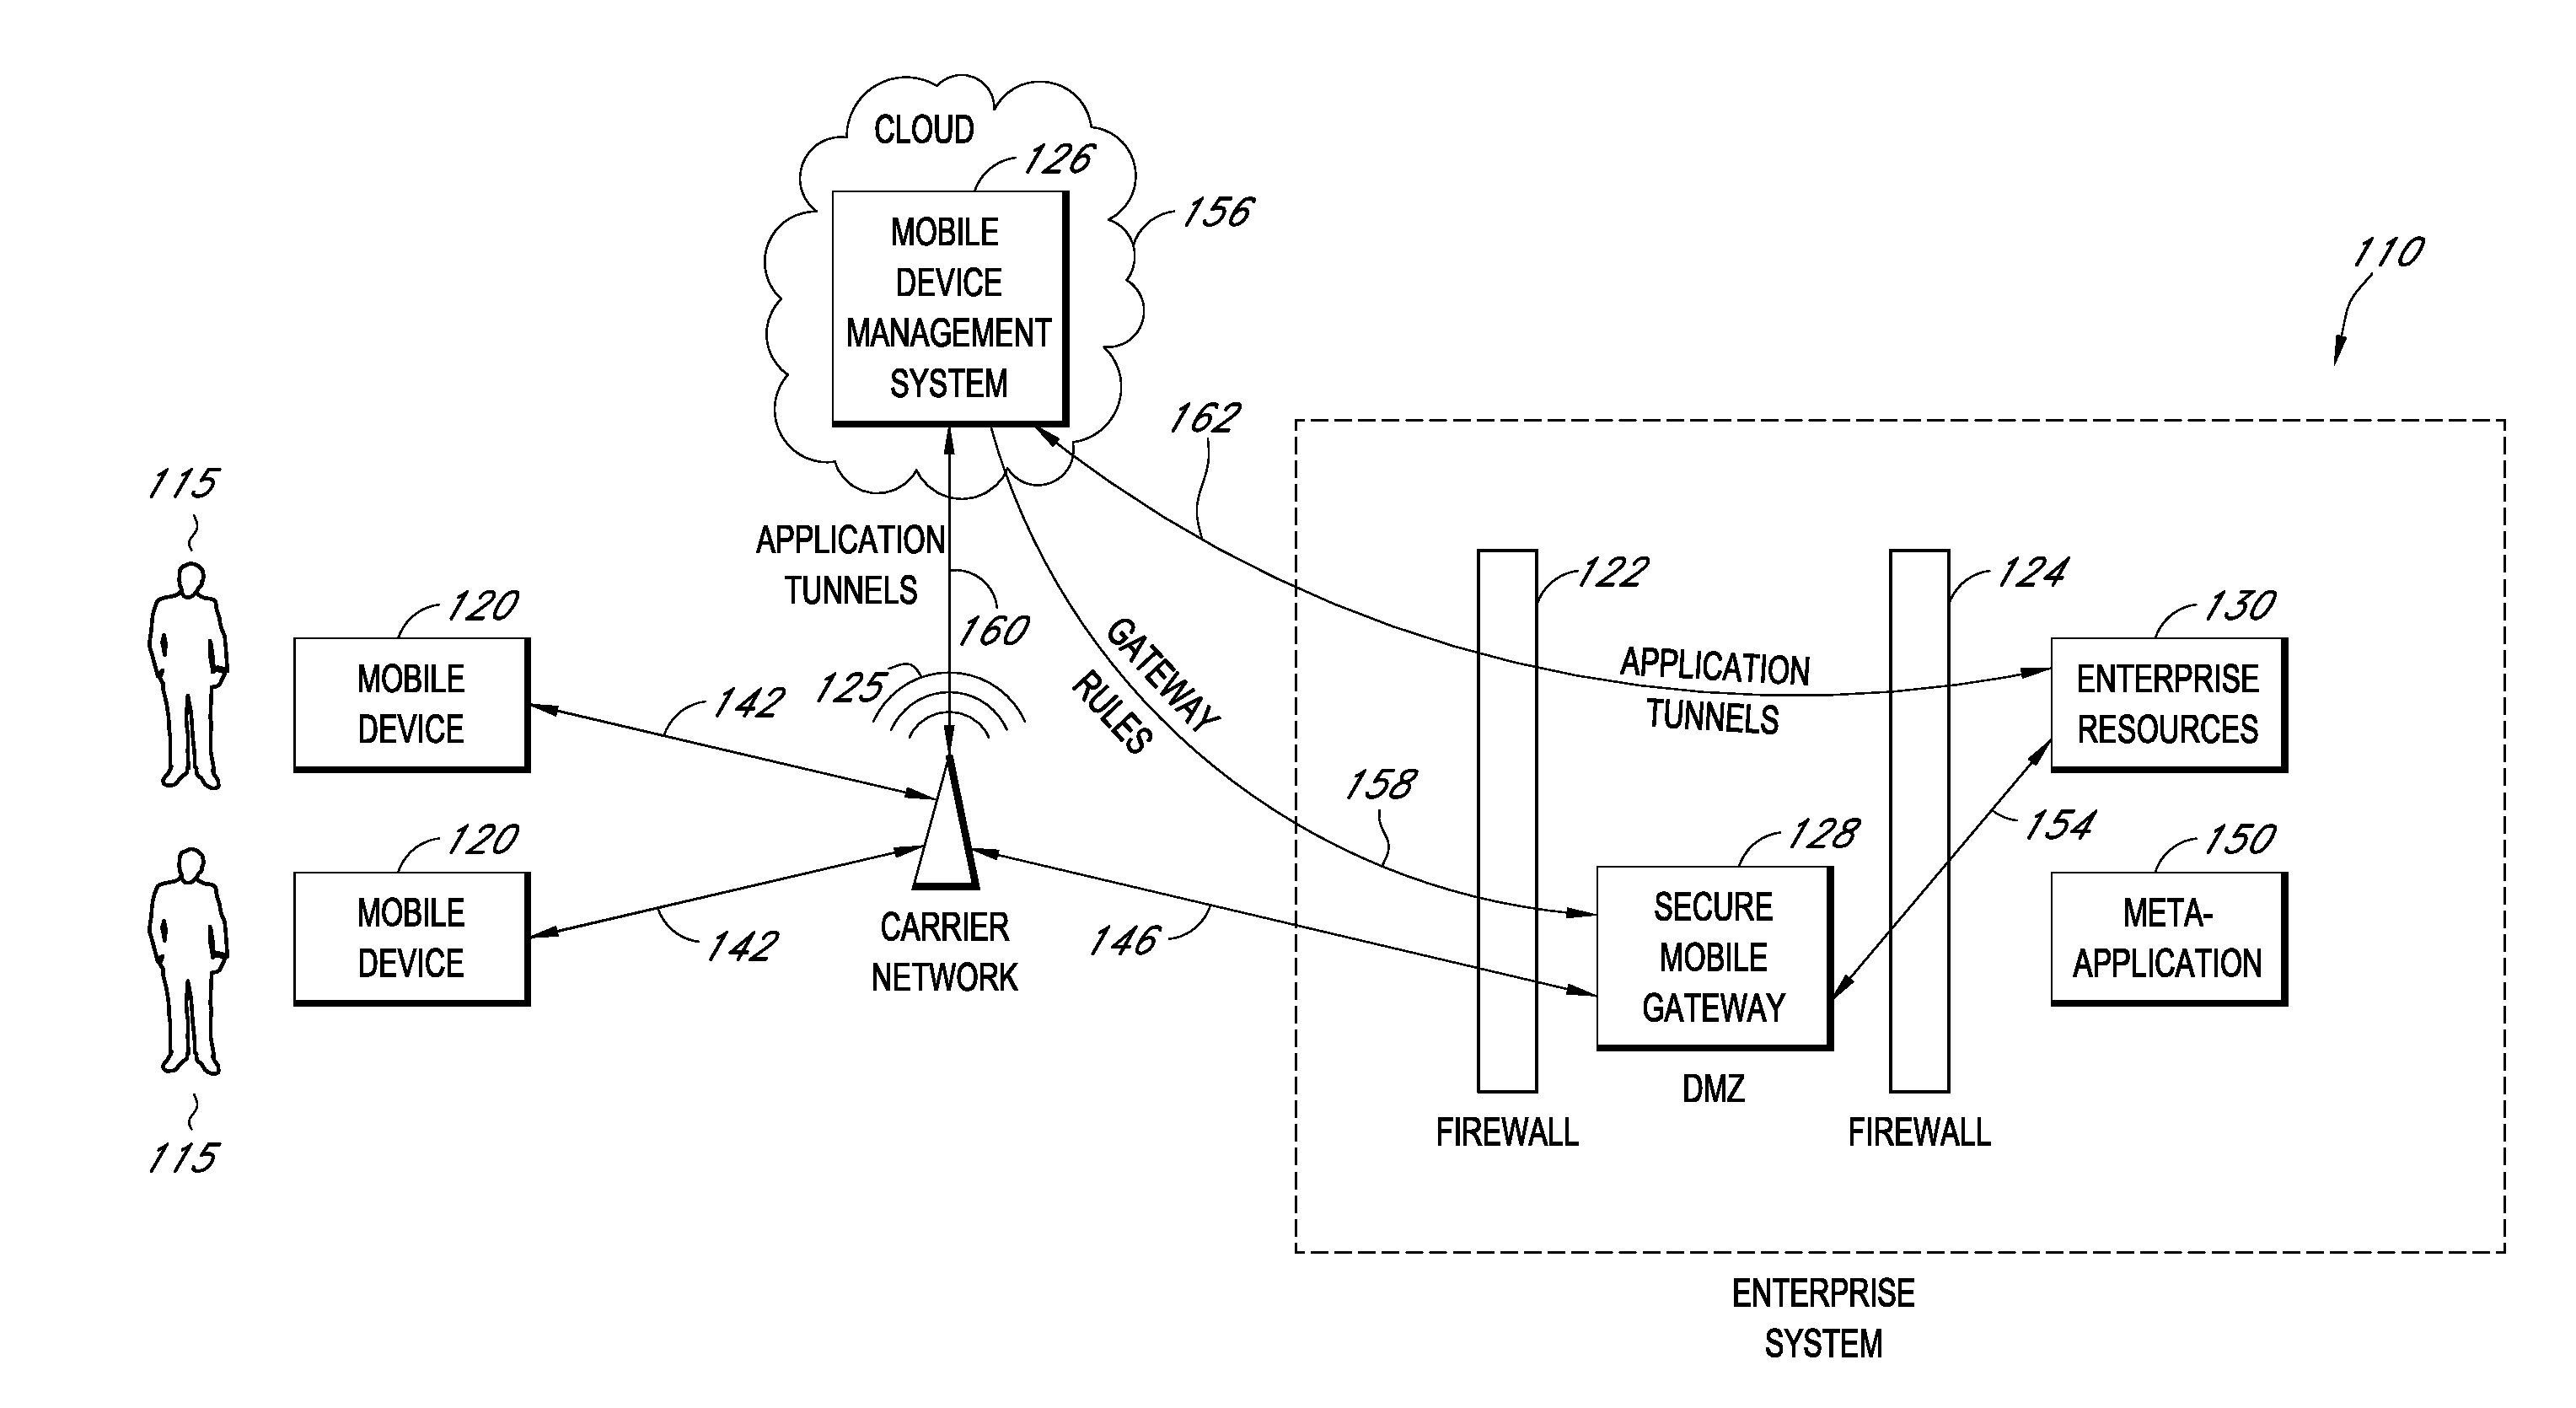 Gateway for controlling mobile device access to enterprise resources